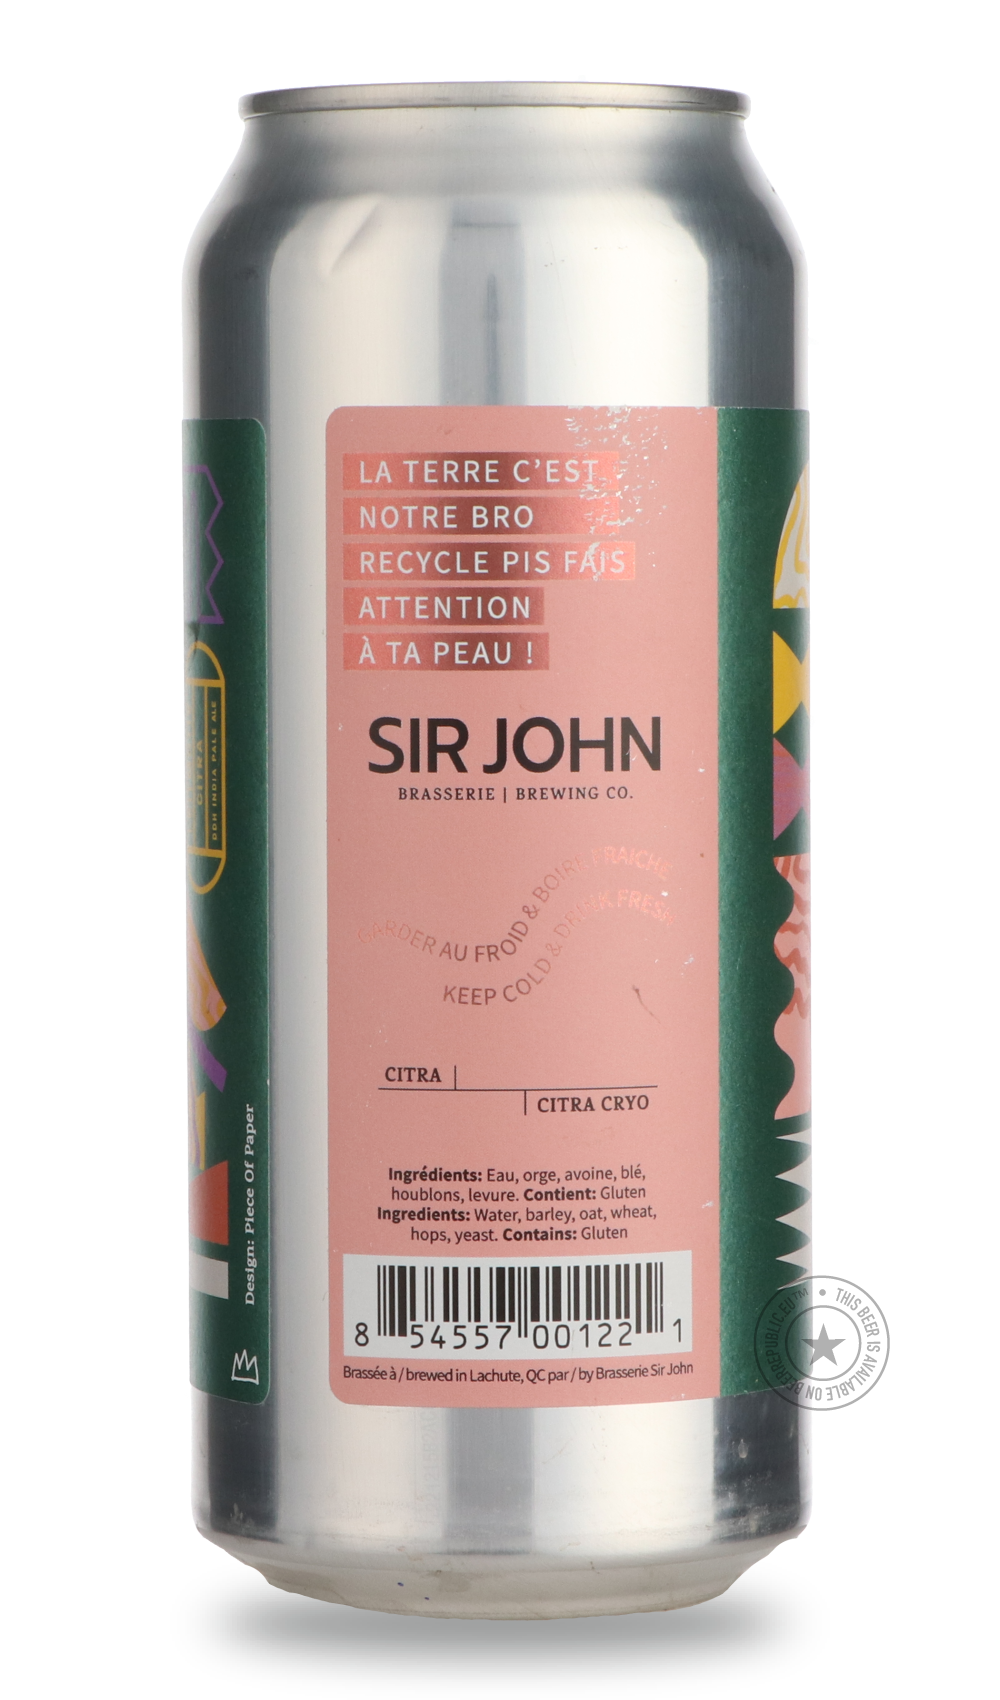 -Sir John- Double Leitmotiv Citra-IPA- Only @ Beer Republic - The best online beer store for American & Canadian craft beer - Buy beer online from the USA and Canada - Bier online kopen - Amerikaans bier kopen - Craft beer store - Craft beer kopen - Amerikanisch bier kaufen - Bier online kaufen - Acheter biere online - IPA - Stout - Porter - New England IPA - Hazy IPA - Imperial Stout - Barrel Aged - Barrel Aged Imperial Stout - Brown - Dark beer - Blond - Blonde - Pilsner - Lager - Wheat - Weizen - Amber -